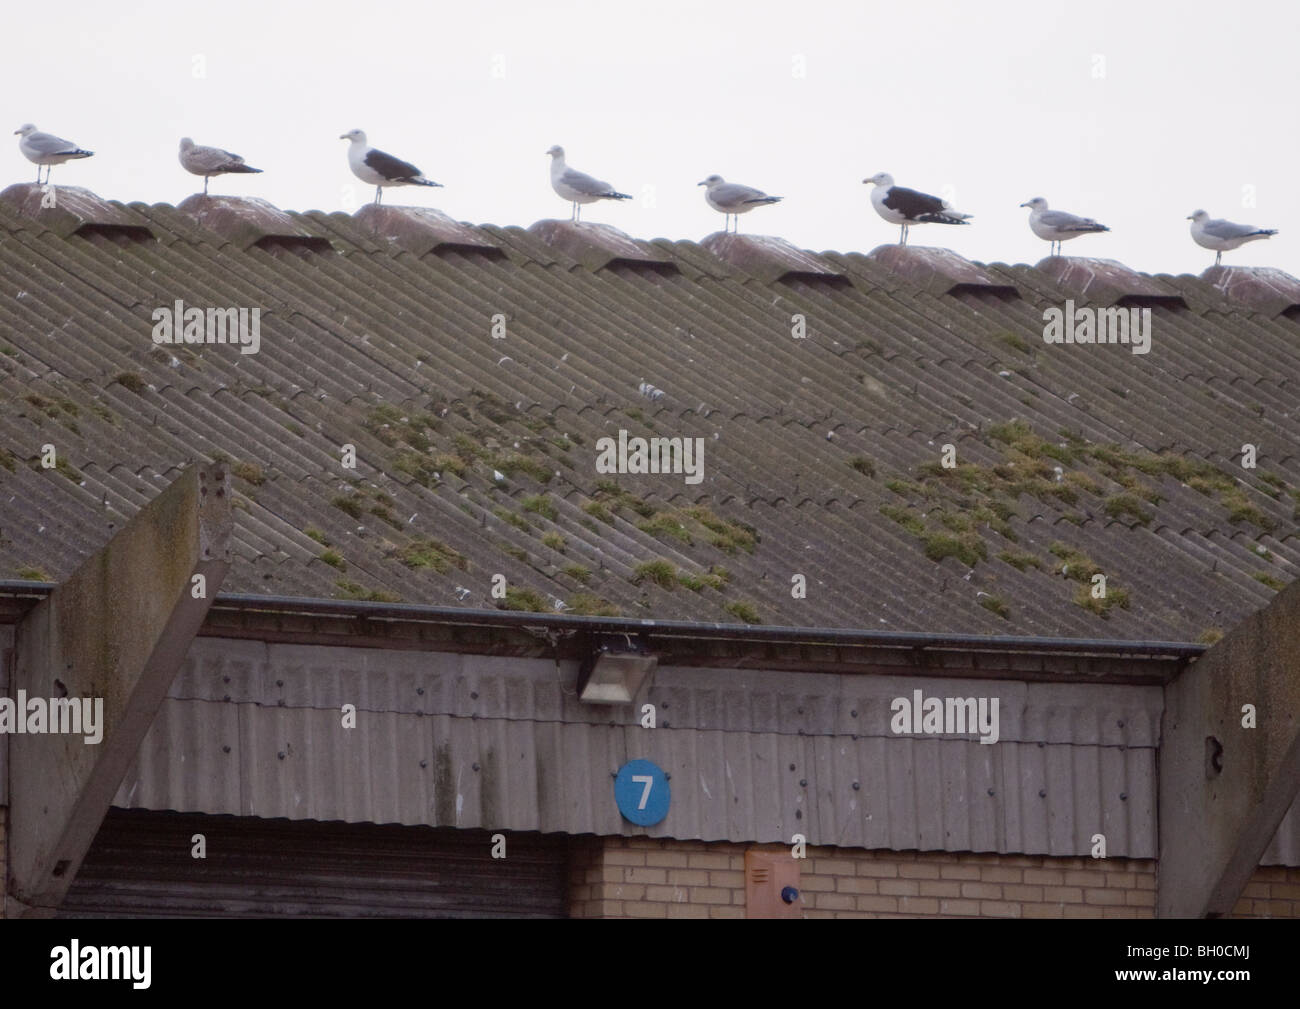 Seagulls on Warehouse corrugated asbestos roof roof Stock Photo